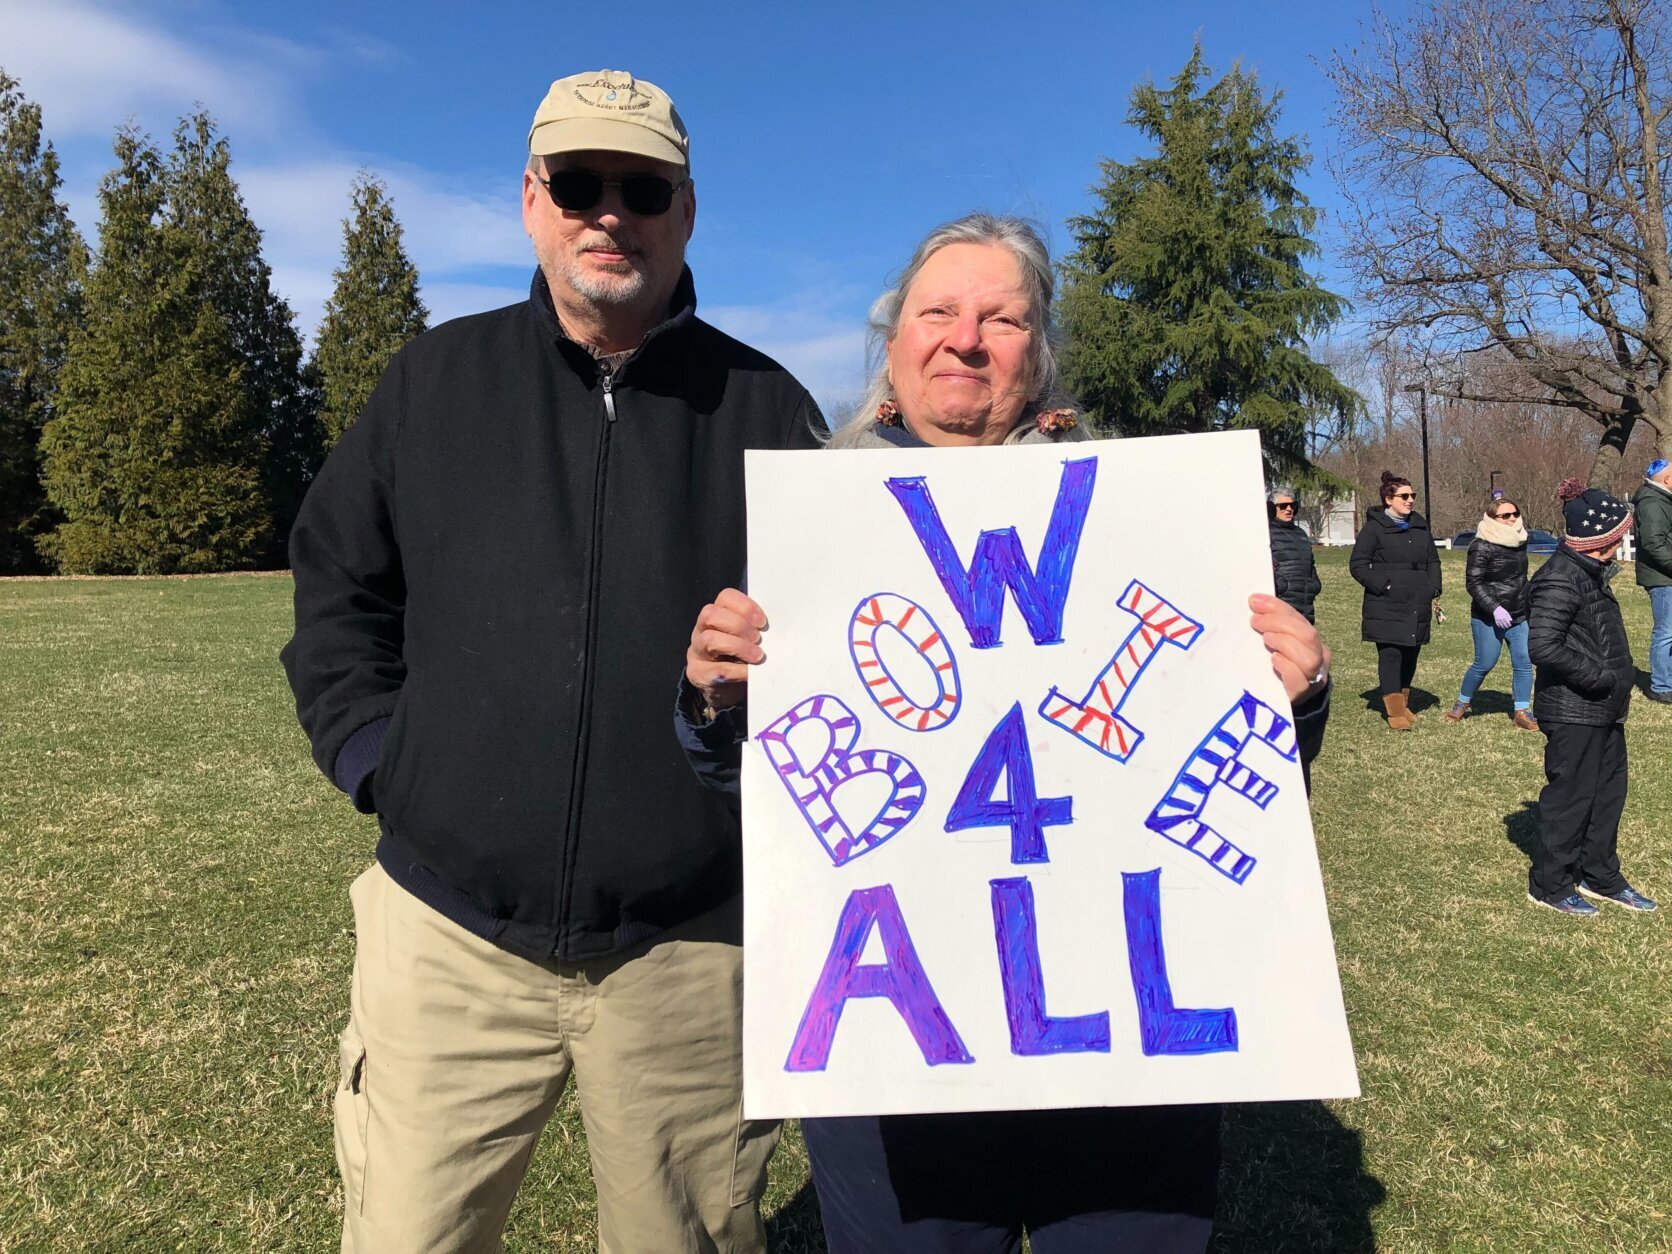 A group gathered in Bowie at Allen Pond Park on Sunday for a peace rally.